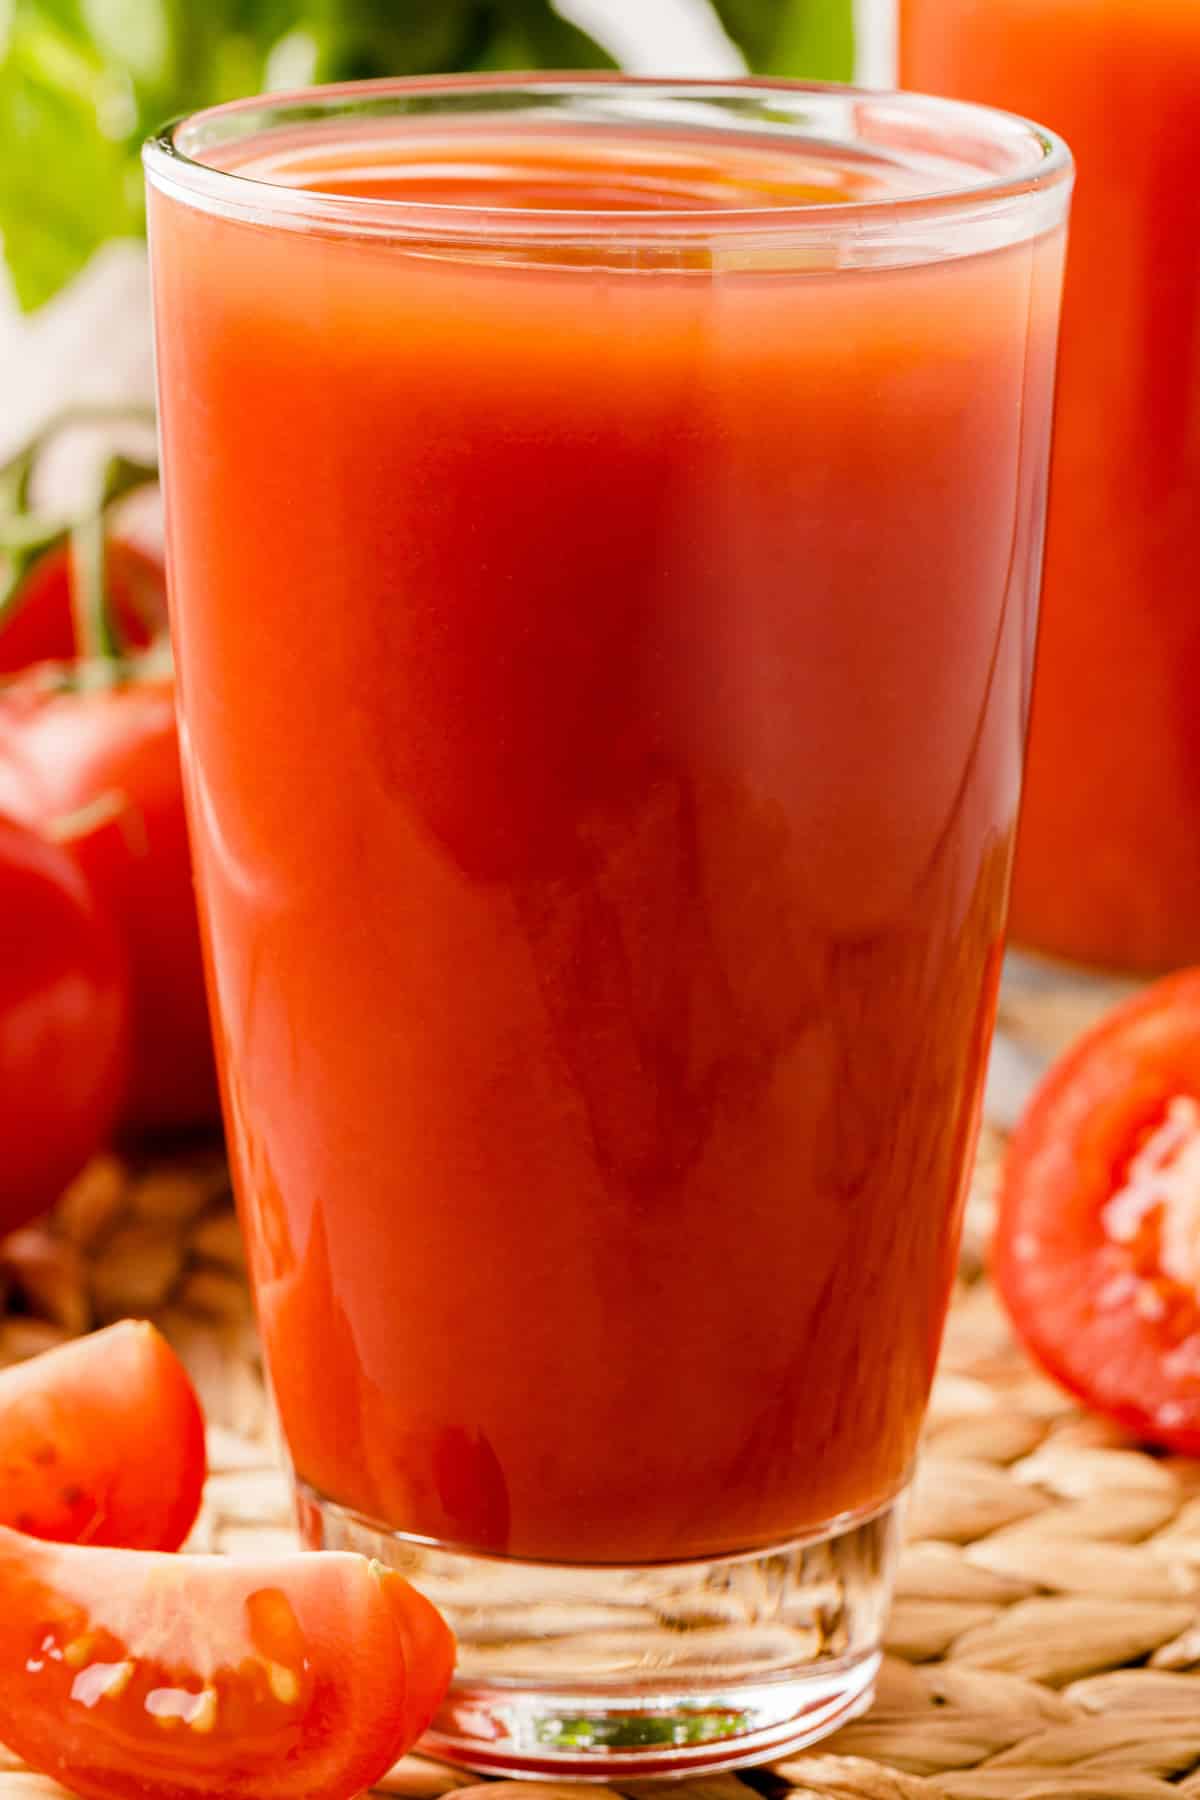 Full glass of tomato juice close up. 